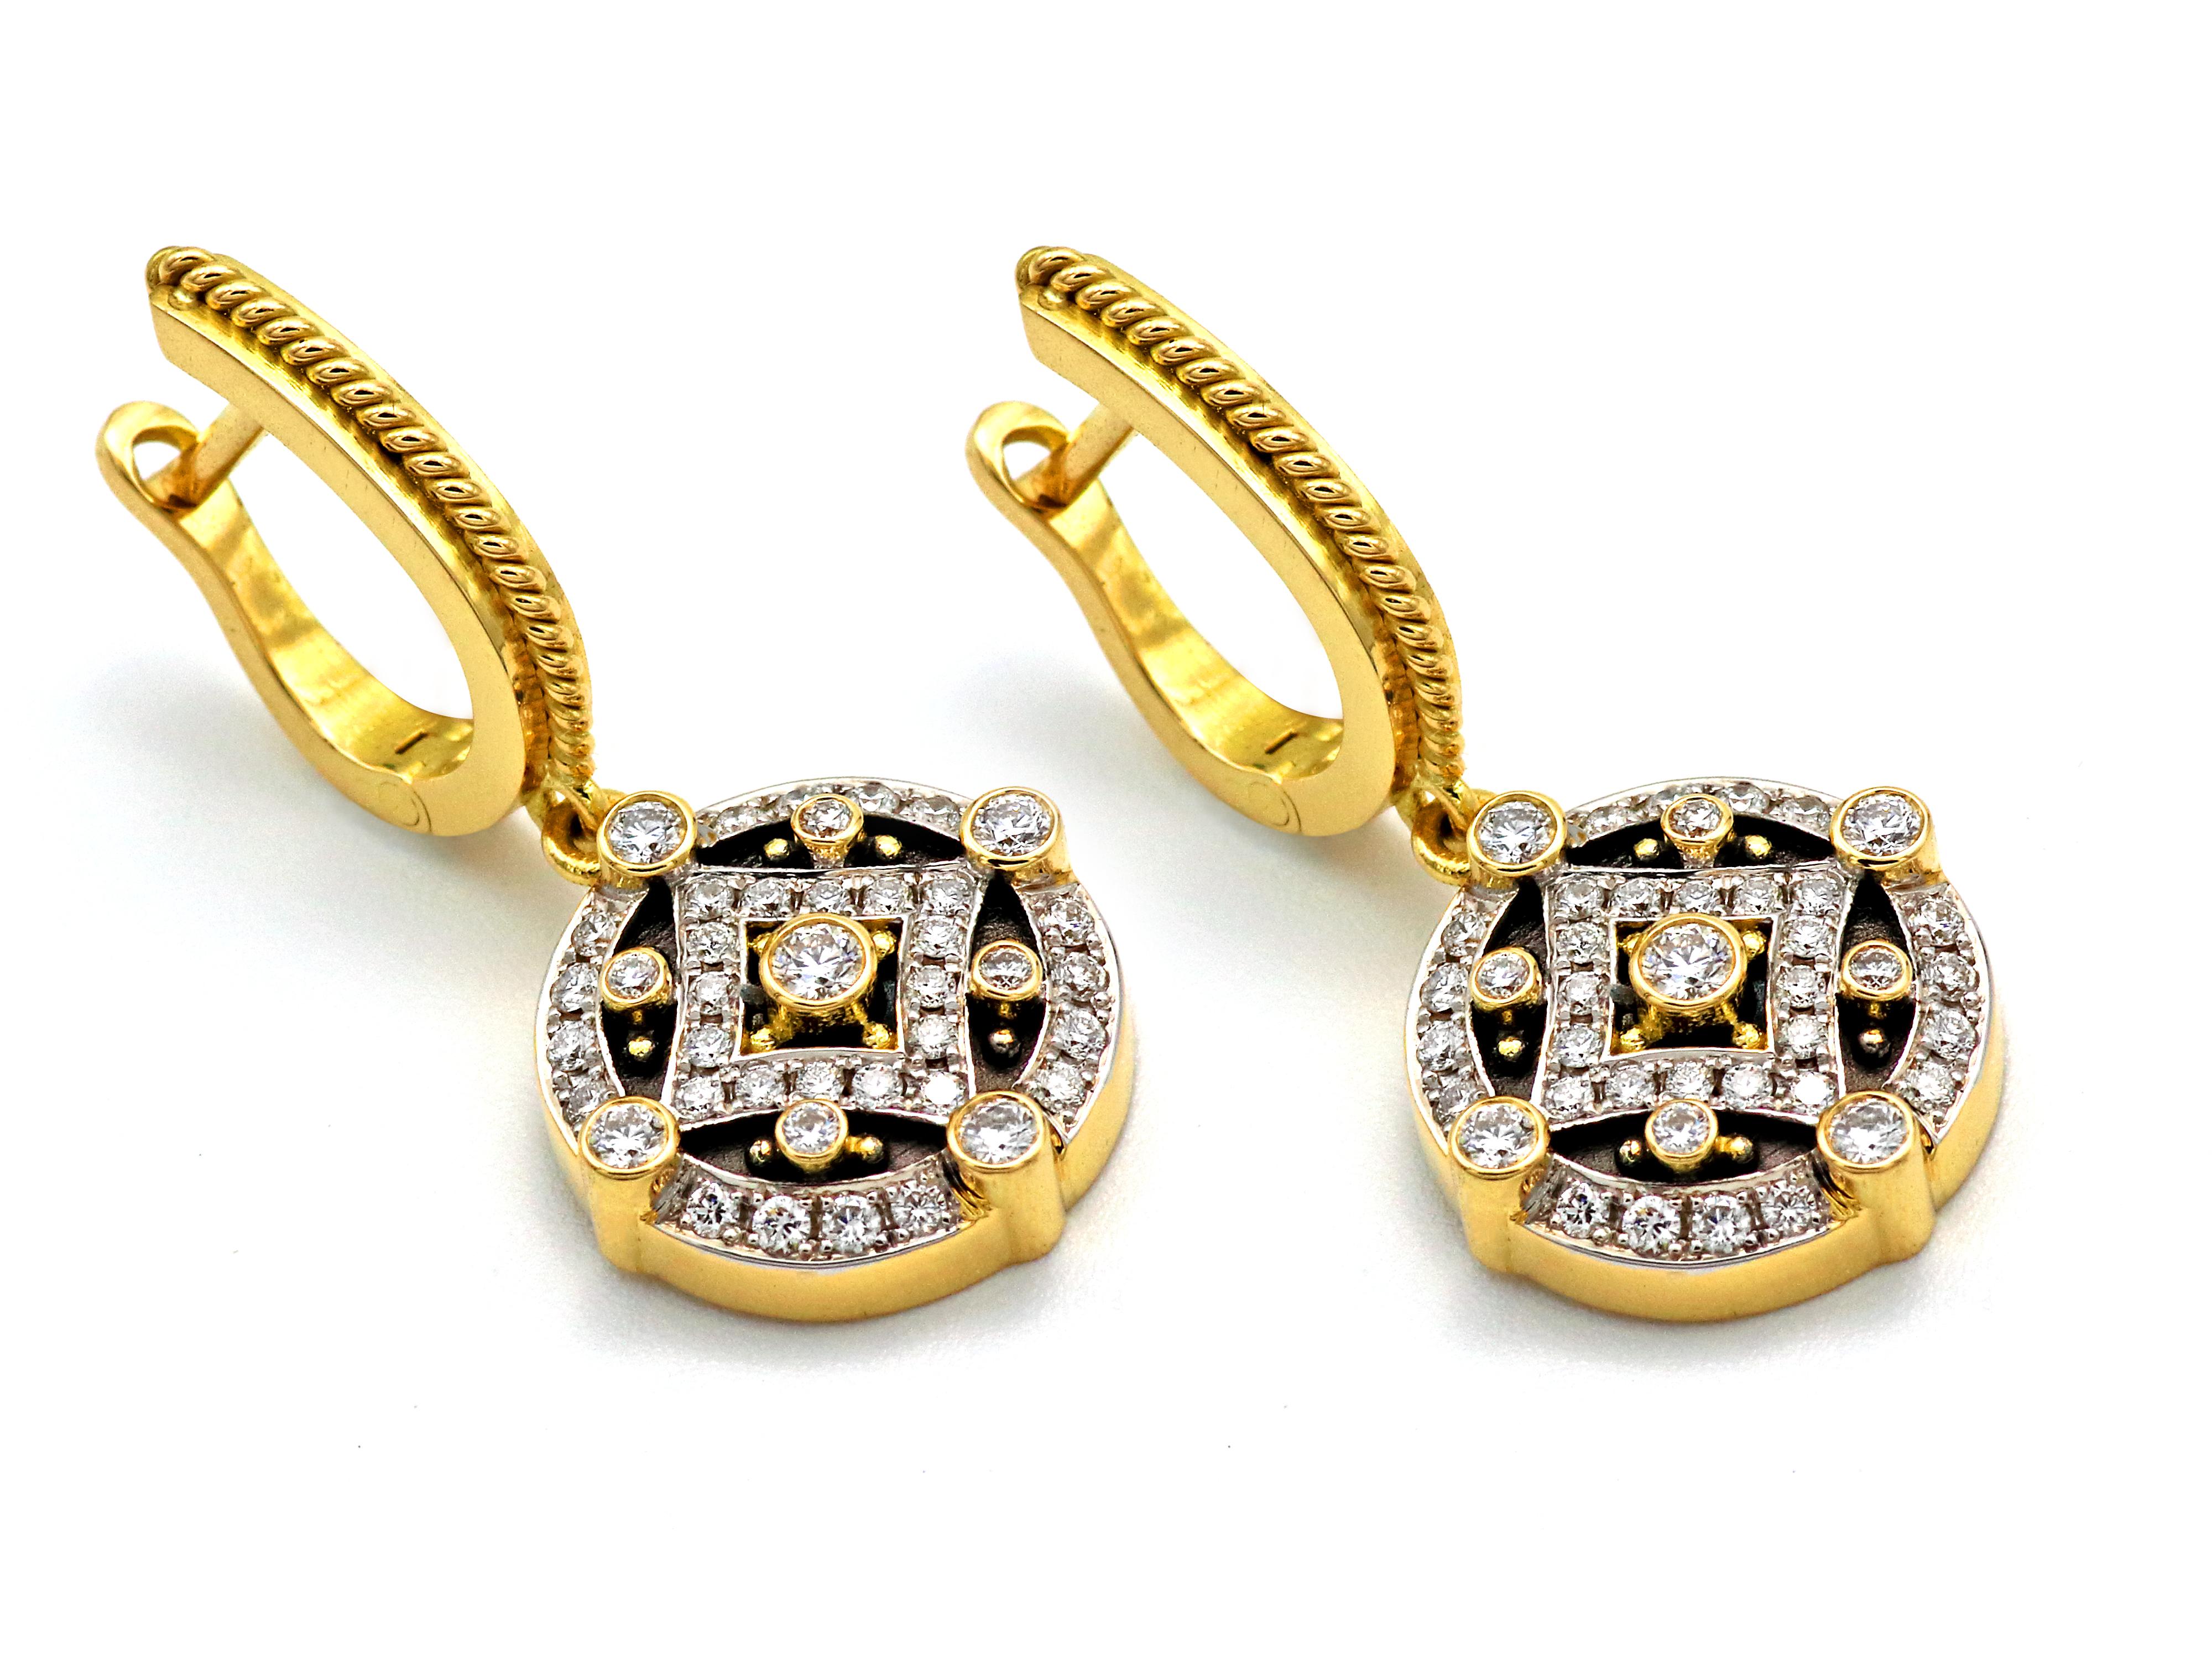 Dangling  Byzantine earrings in 18 karat gold hand made in Athens Greece by Dimos of the Noir Collection, set with 0.80 carat not graded natural brilliant cut diamonds, handmade filigrees and microscopic setting to perfection.  
The clasp it’s a